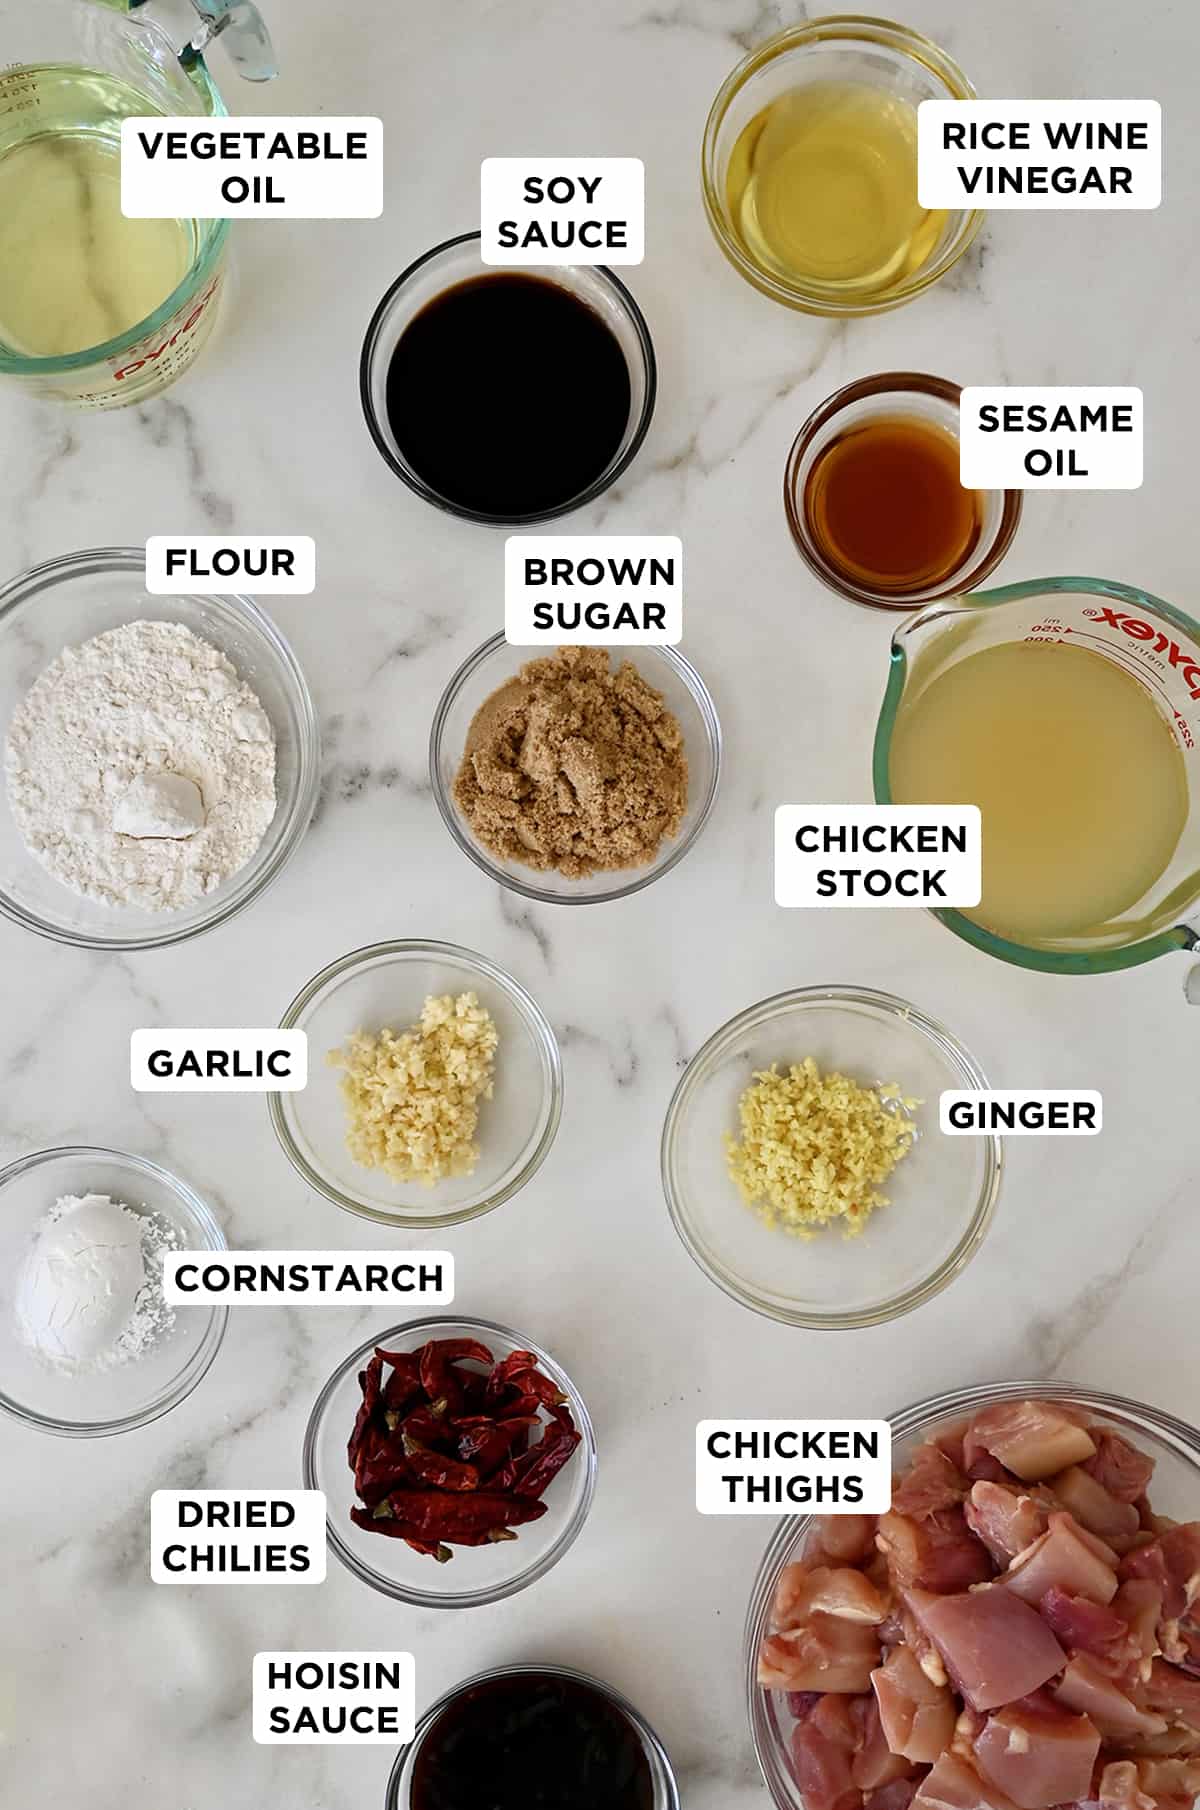 Ingredients for general Tso's chicken in various sizes of glass bowls, including vegetable oil, hoisin sauce, sesame oil, brown sugar, chicken stock, minced garlic and ginger, flour, cornstarch, chicken thigh pieces, whole dried chilies, soy sauce, and rice wine vinegar.